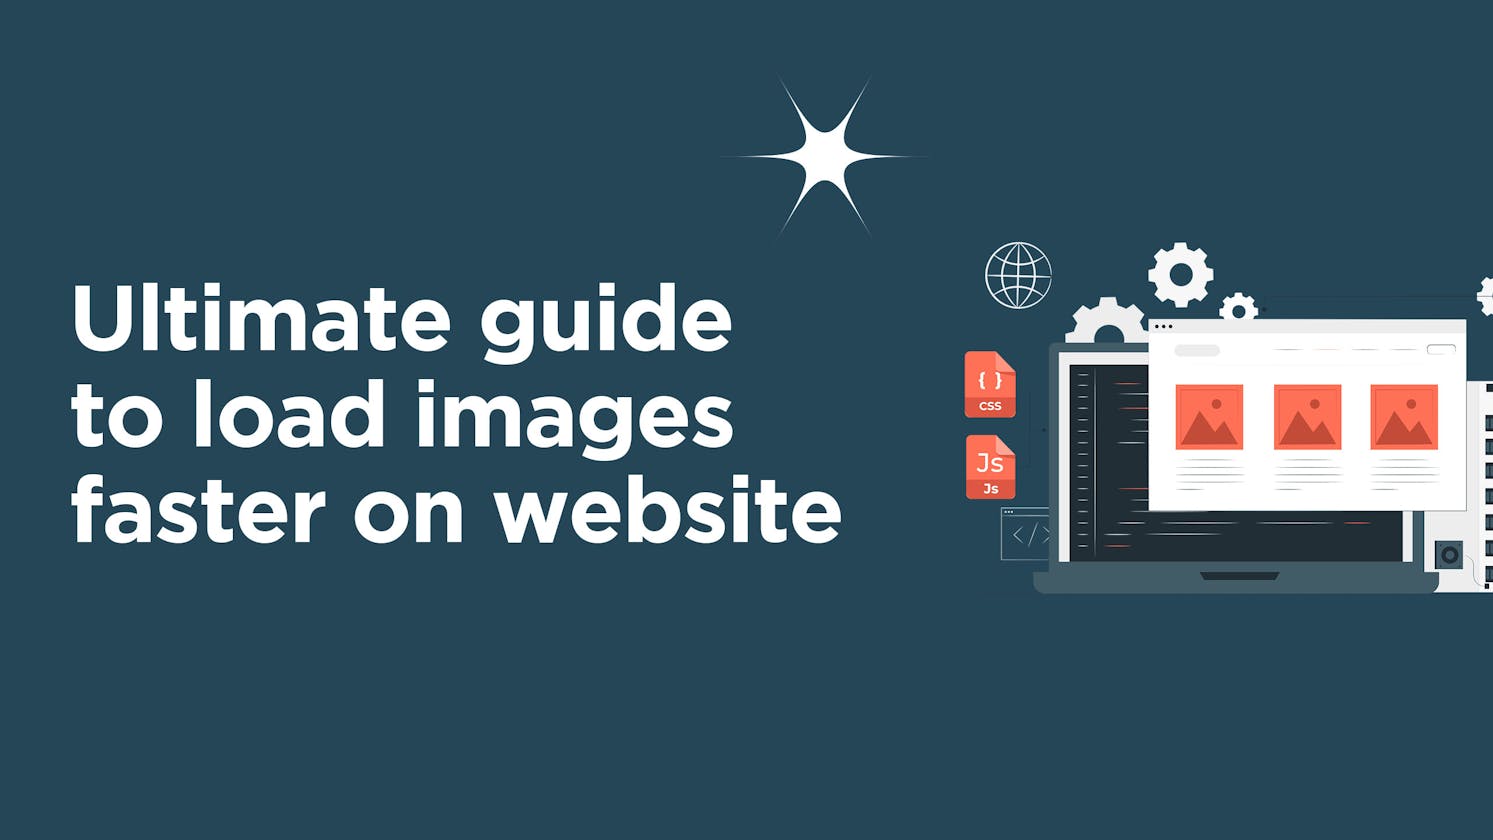 The ultimate Guide to make images load faster on website